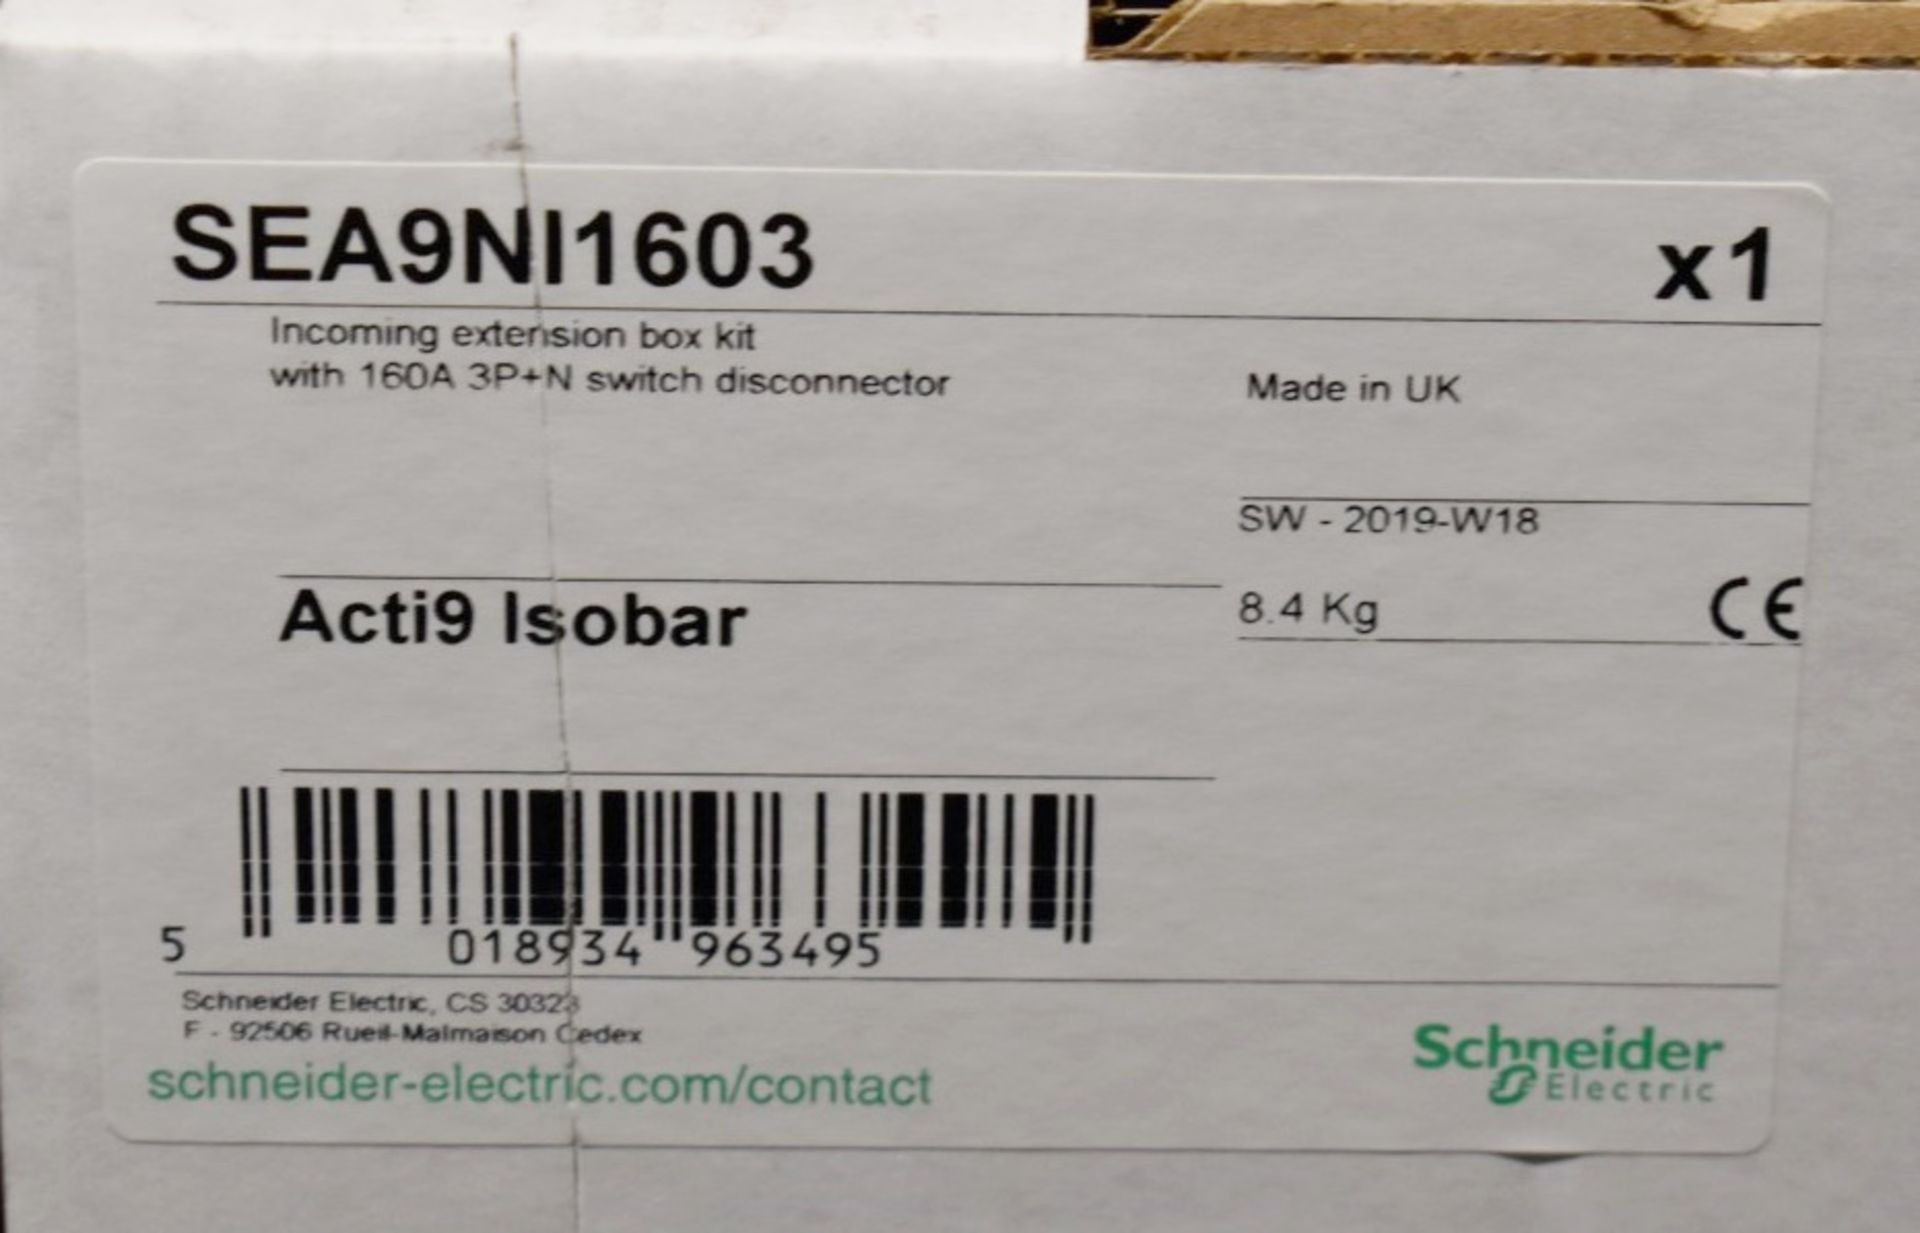 1 x Schneider Acti9 Isobar Incoming Extension Box Kit With 160A 3P+N Switch Disconnector SEA9NI1603 - Image 6 of 7